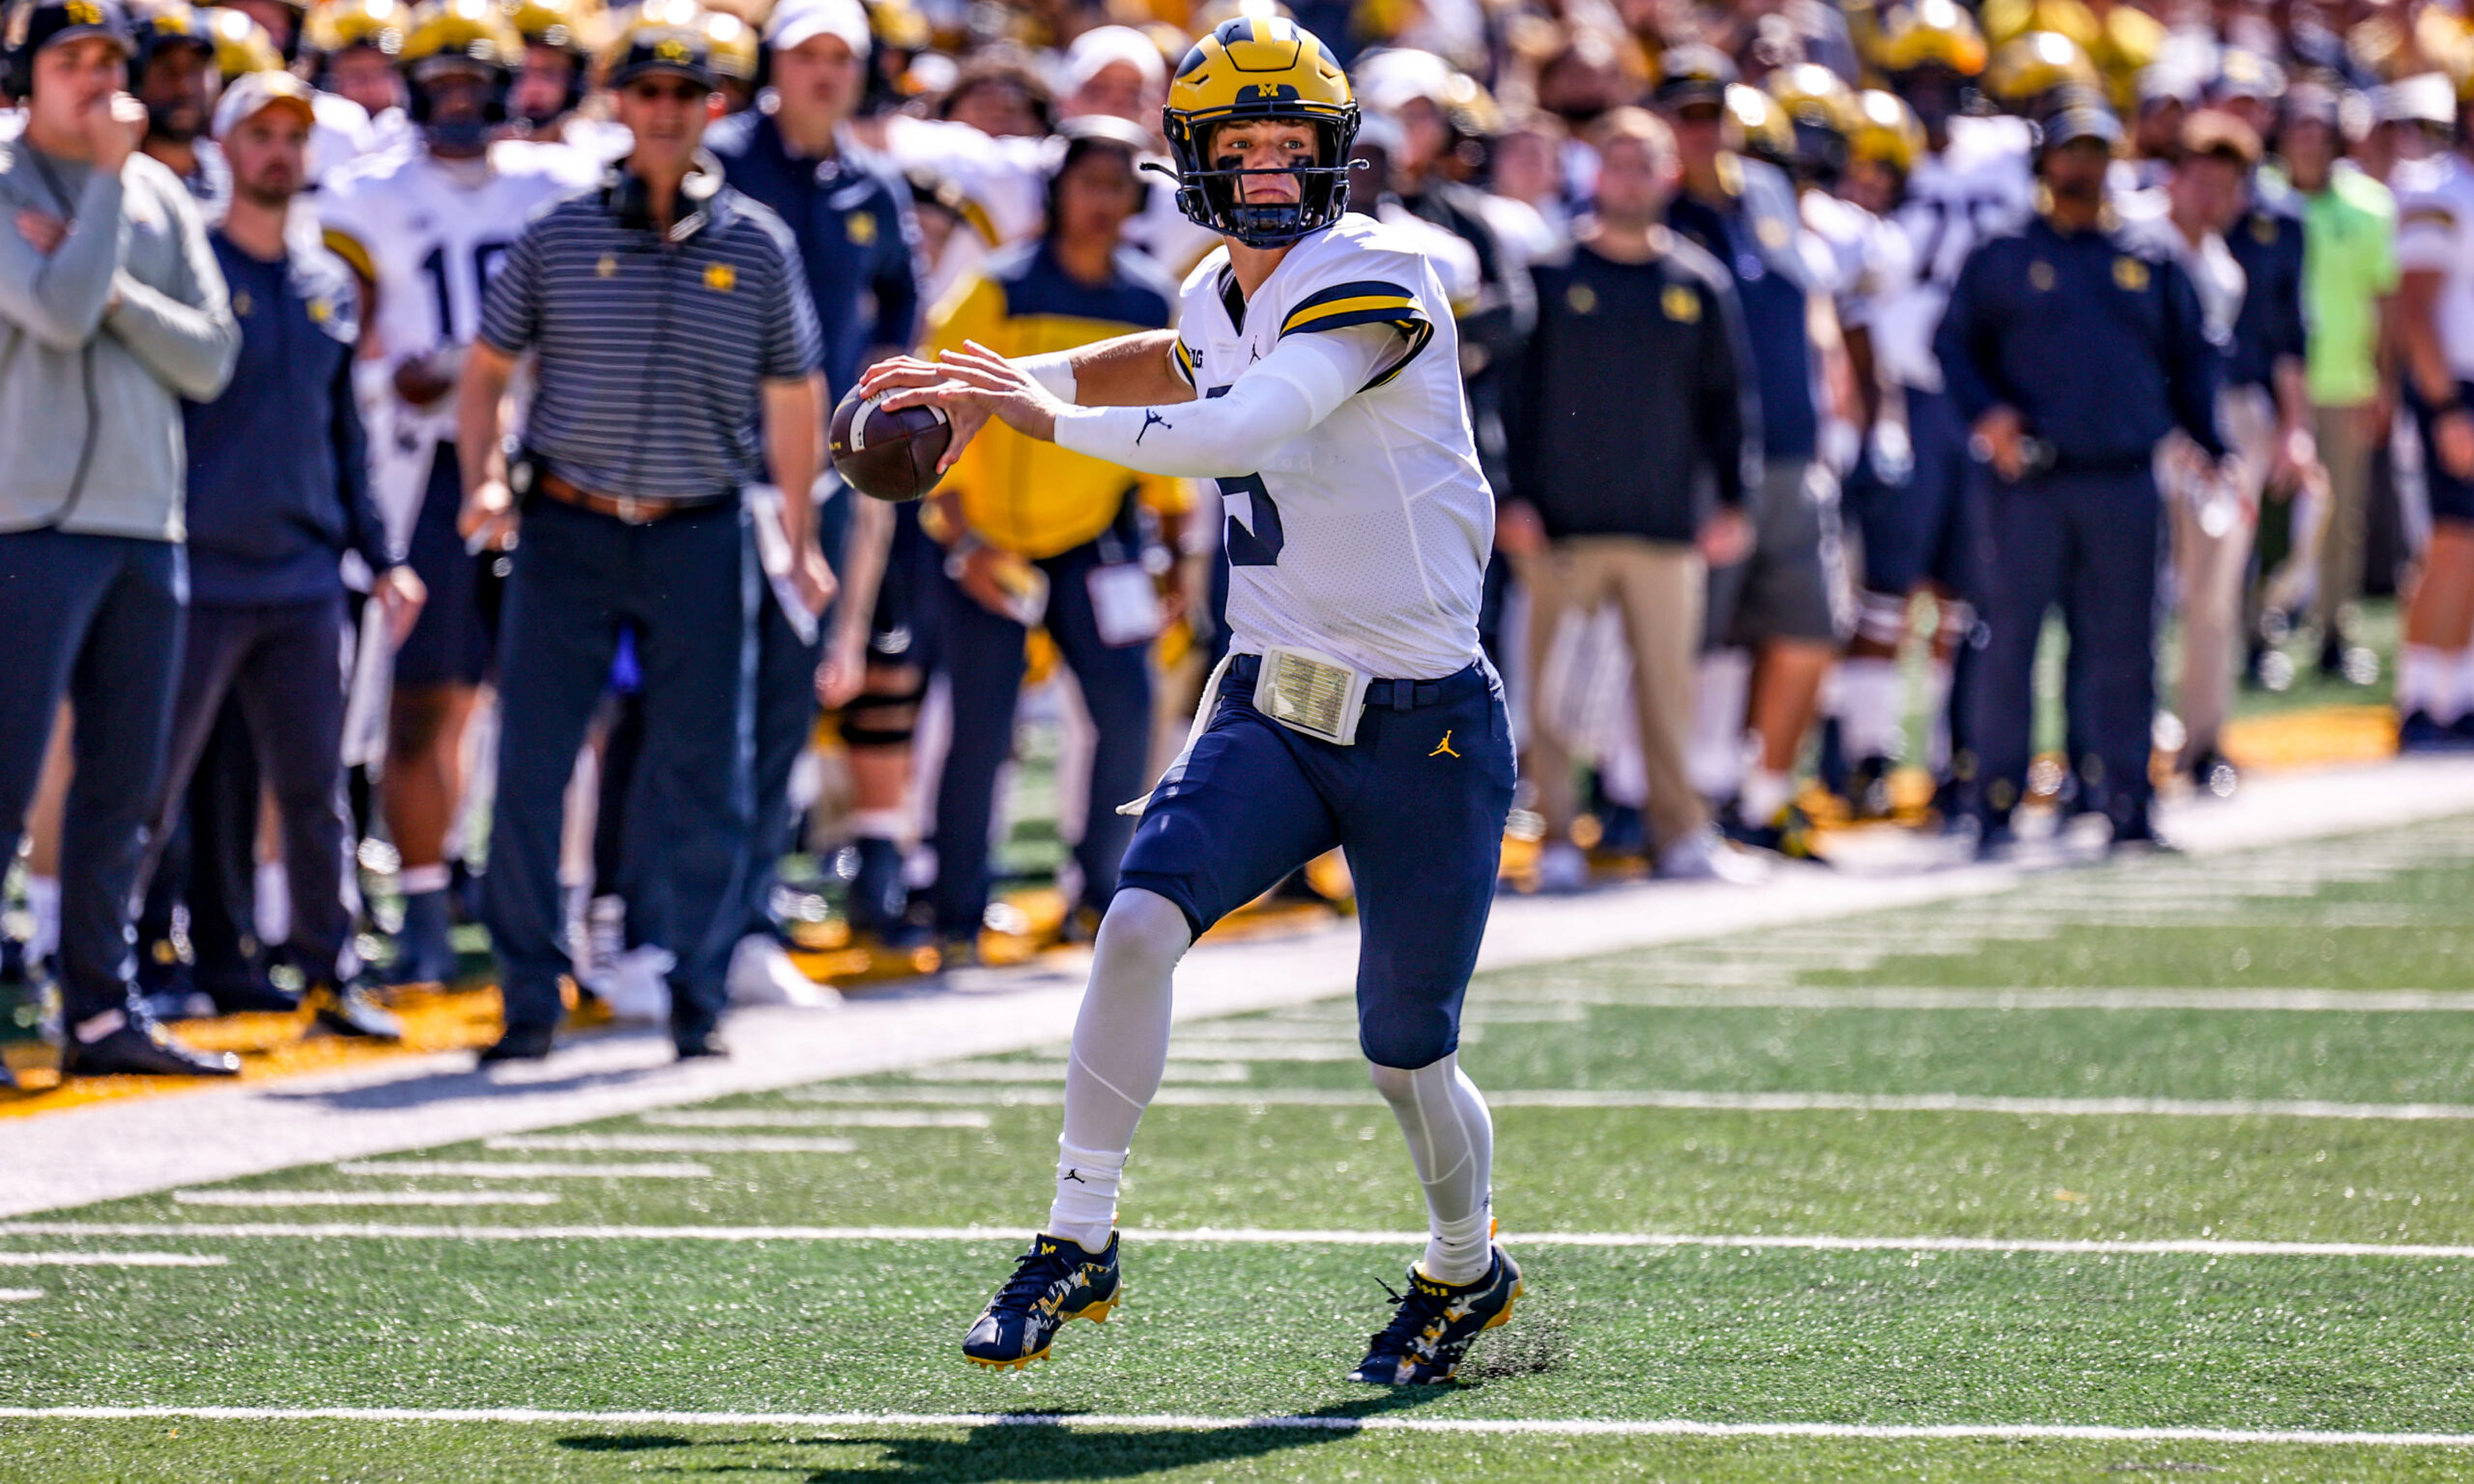 What was the plan for Michigan football QB J.J. McCarthy vs. Iowa? Rein him in or let him make plays?